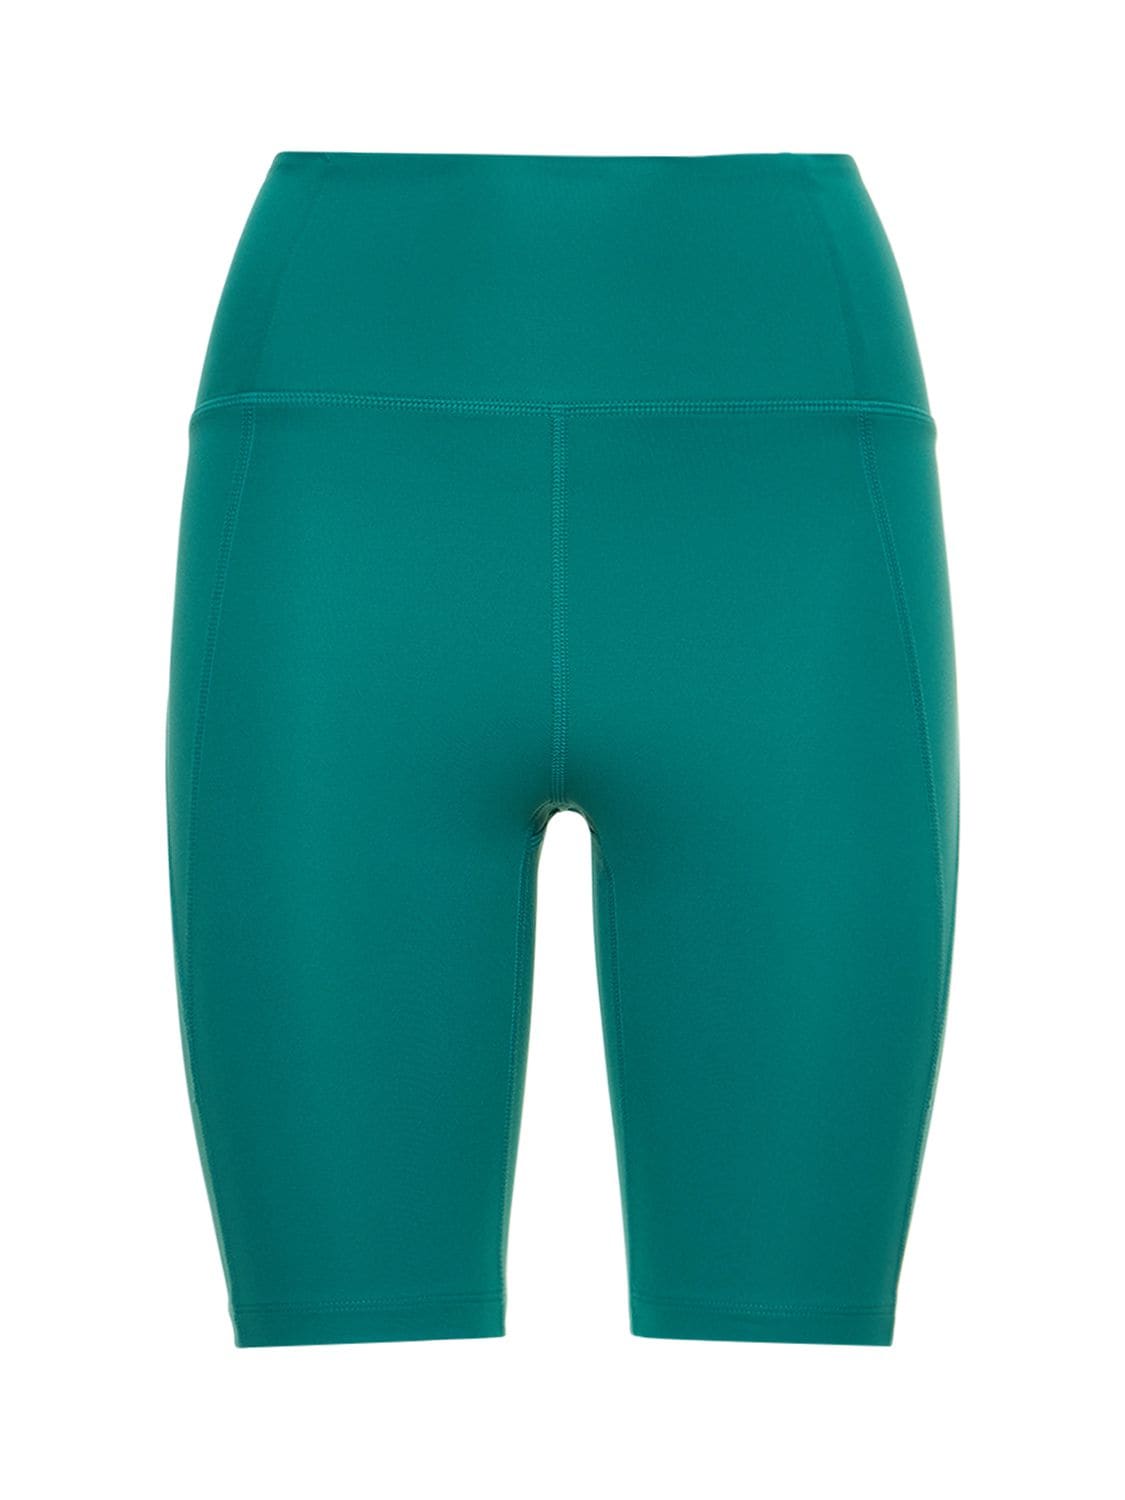 Girlfriend Collective High Rise Stretch Tech Running Shorts In Green